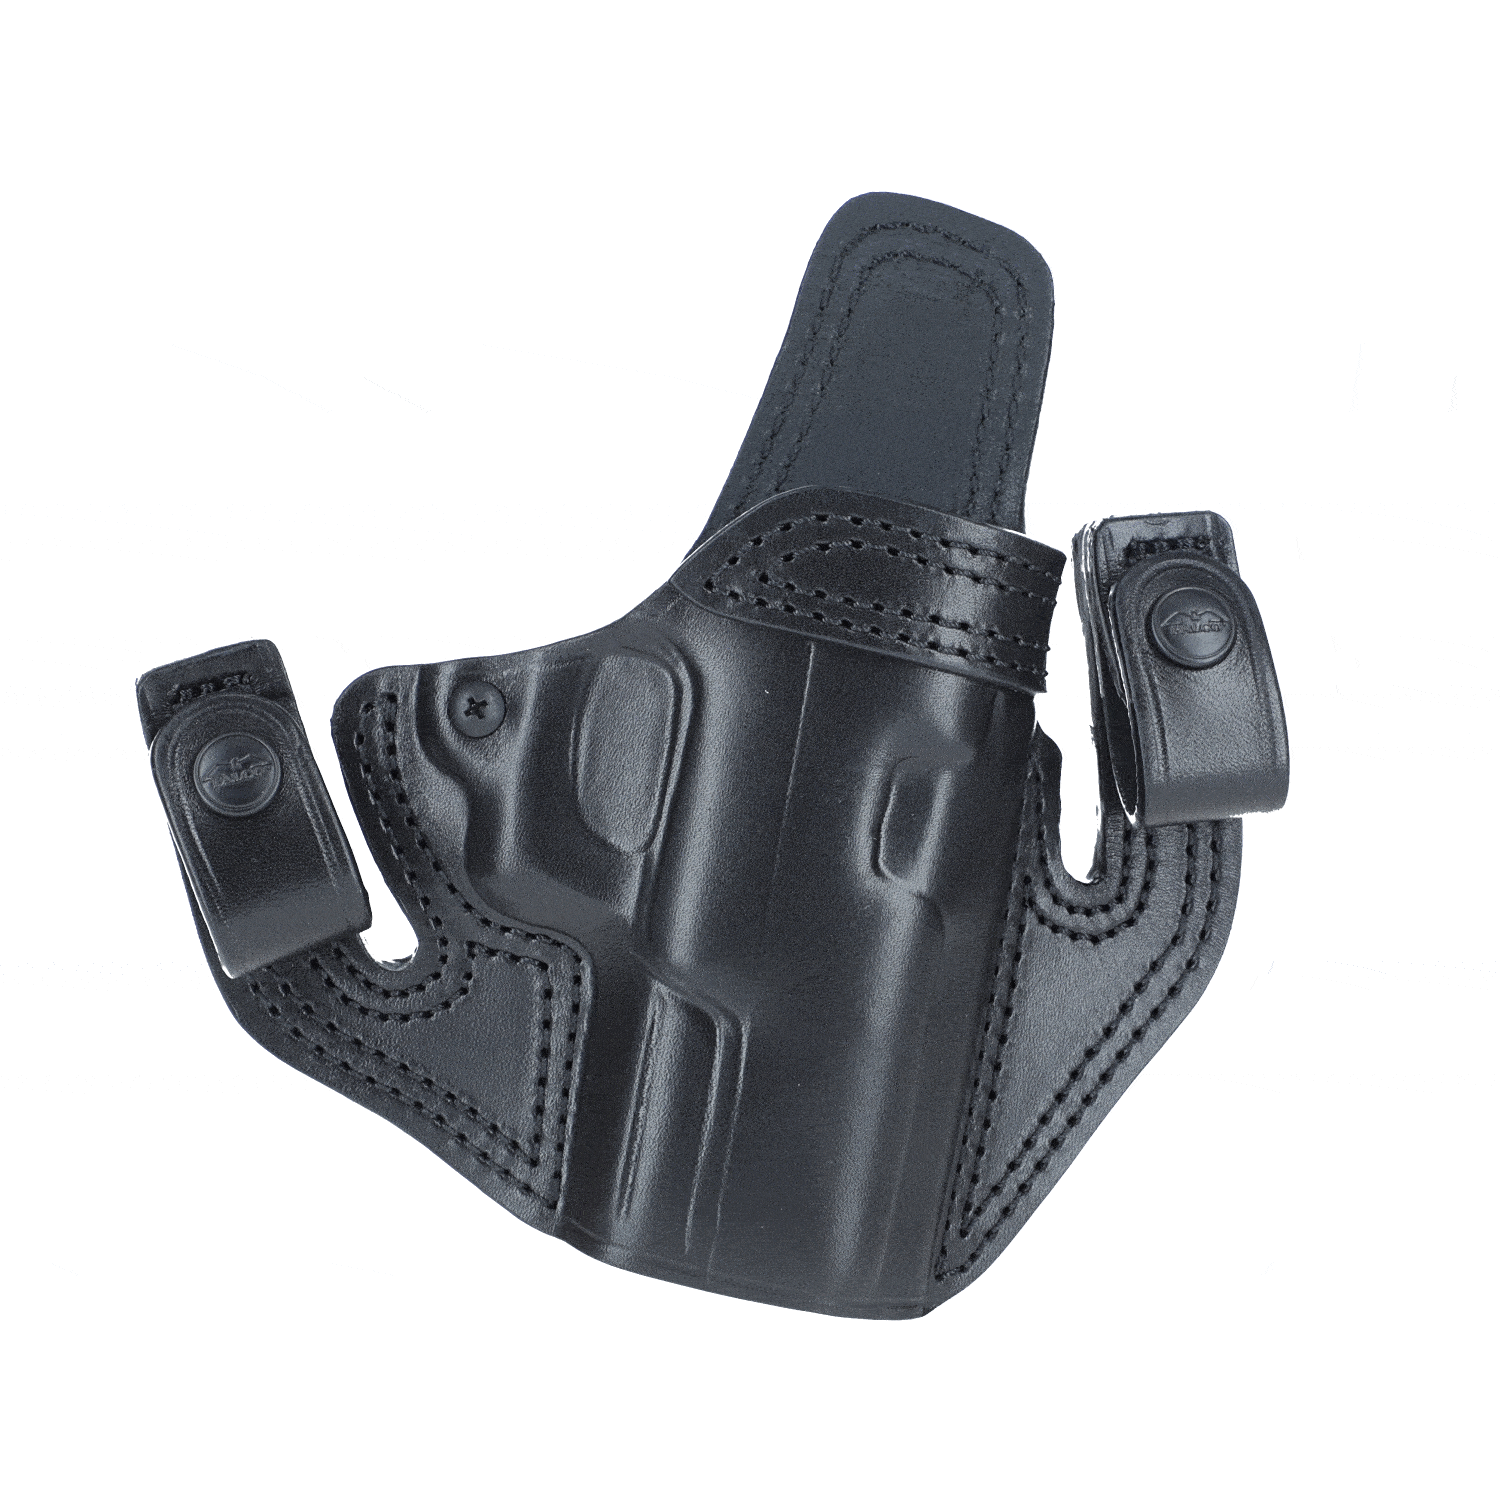 Timeless IWB/OWB leather holster with snaps